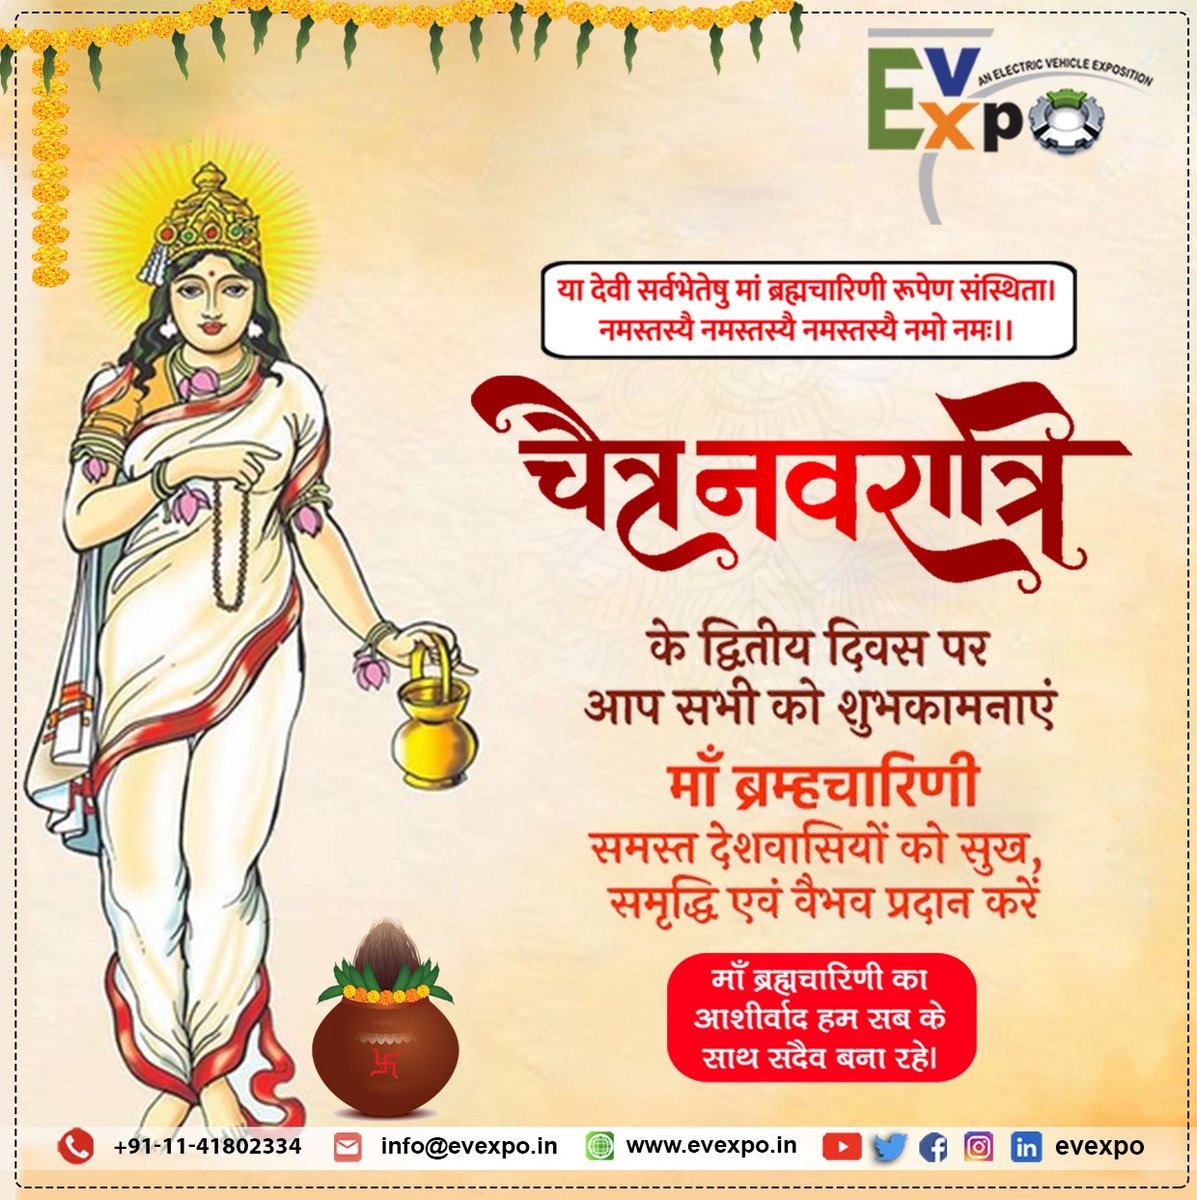 'Happy Navratri! 🙏 Today, on the second day of Navratri, we honor Maa Brahmacharini, the embodiment of love and wisdom. At EvExpo, we celebrate her divine energy by embracing the spirit of perseverance and knowledge. 

#Navratri2024  #MaaBrahmacharini #EVExpo #divine